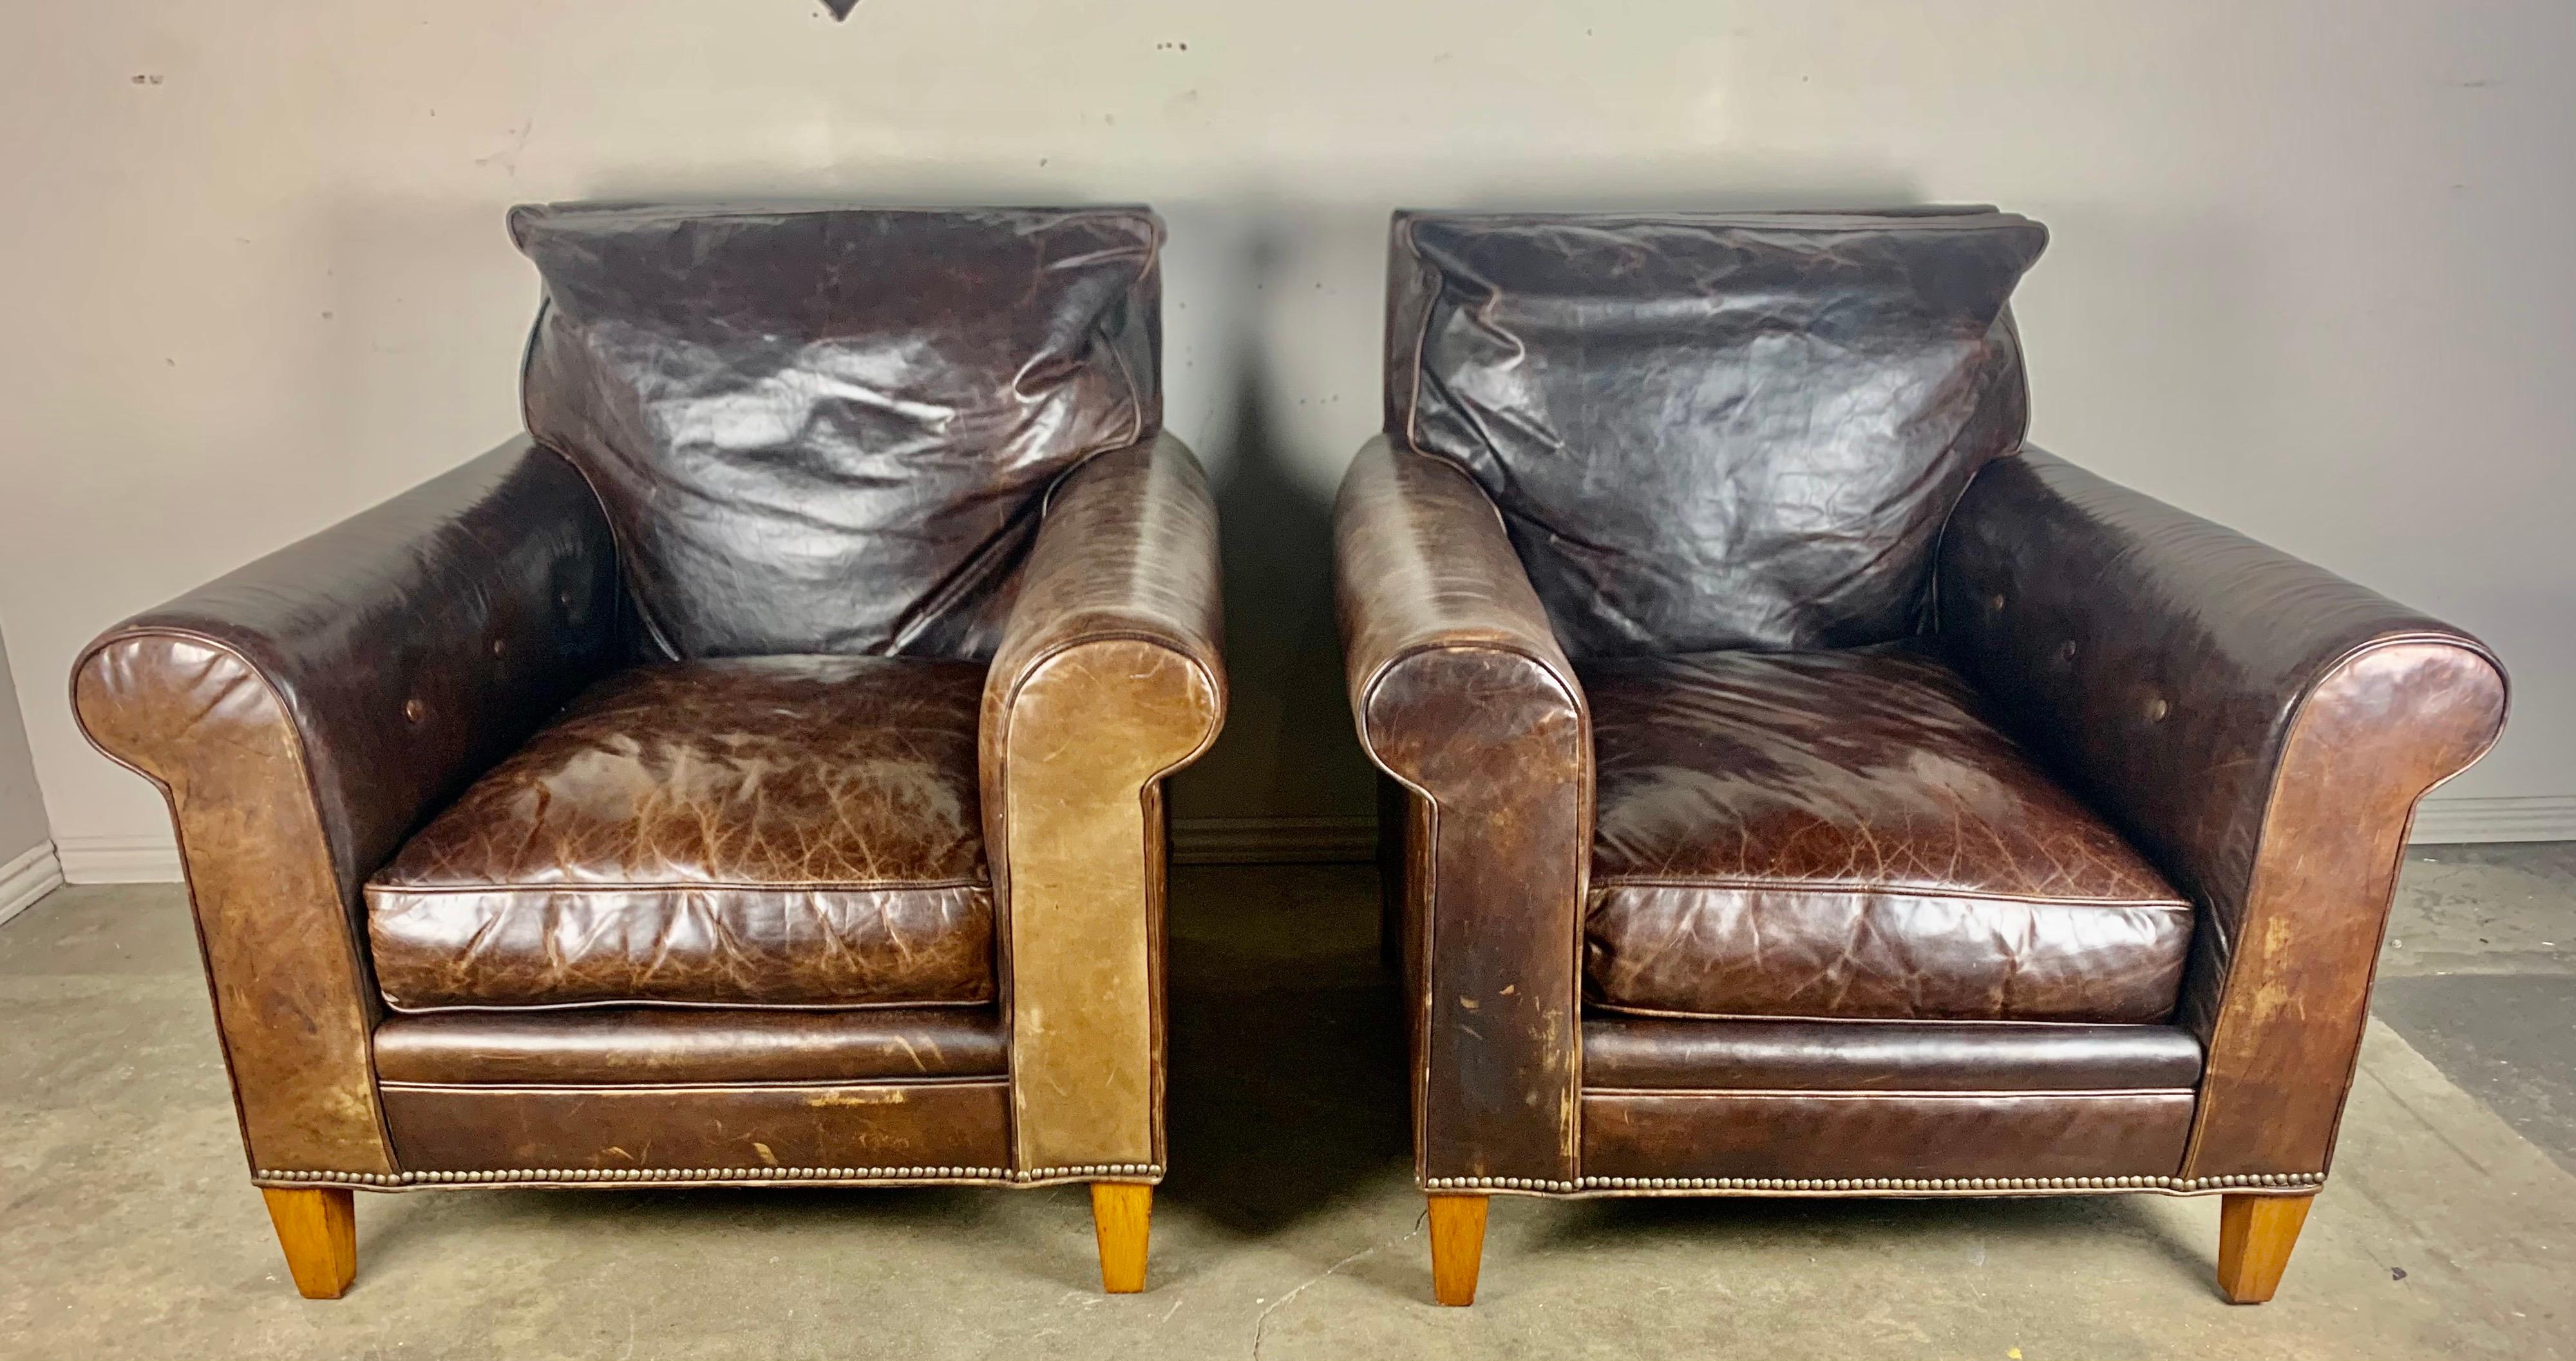 Pair of vintage Ralph Lauren leather club chairs from the mid-20th century. These classic style club chairs are upholstered in their original leather that has developed a gorgeous patina and have aged perfectly over the years. The chairs are